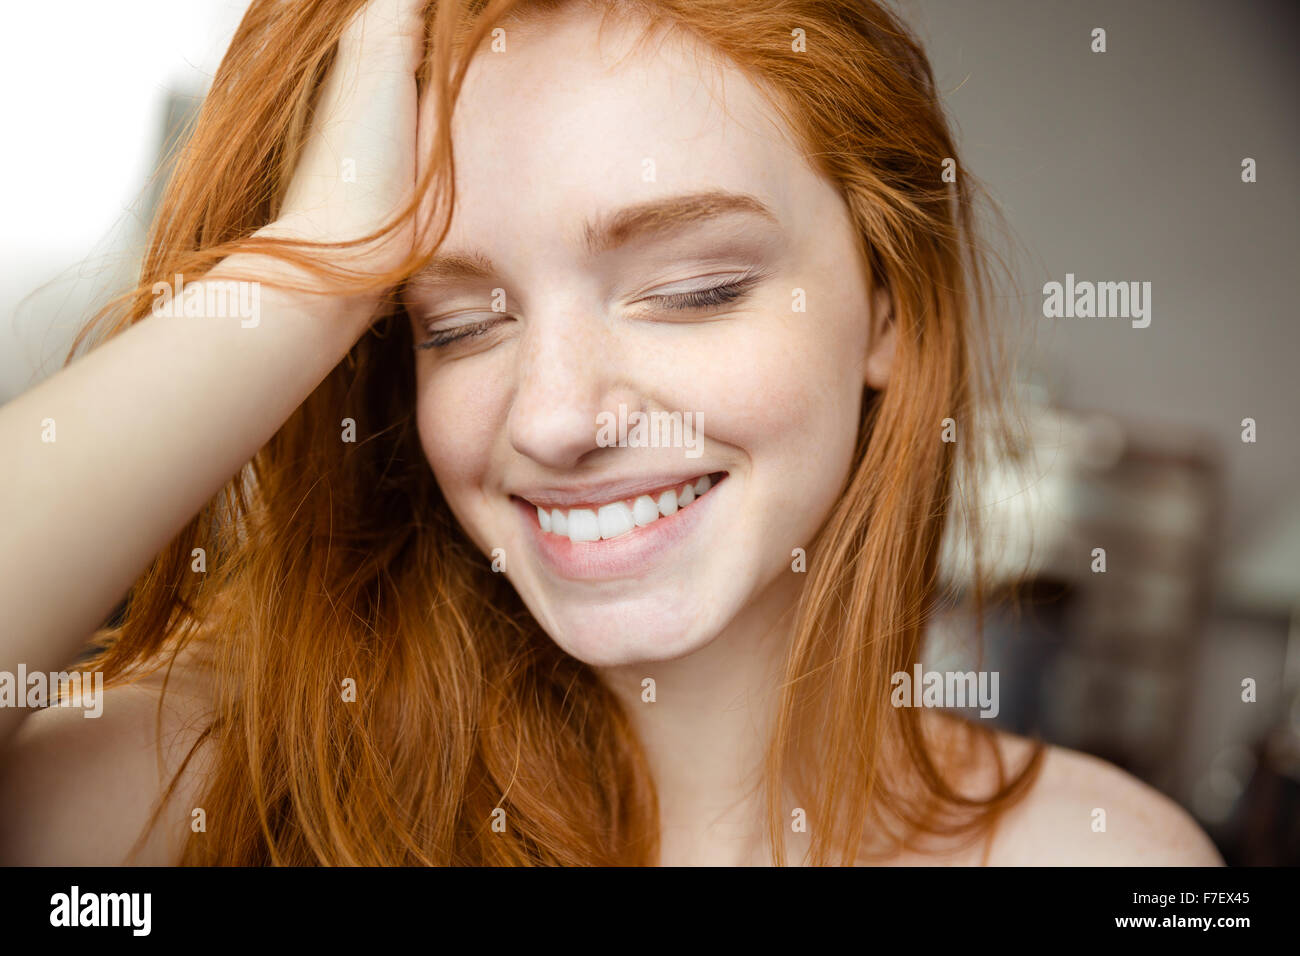 Closeup portrait of a smiling redhead woman with closed eyes Banque D'Images